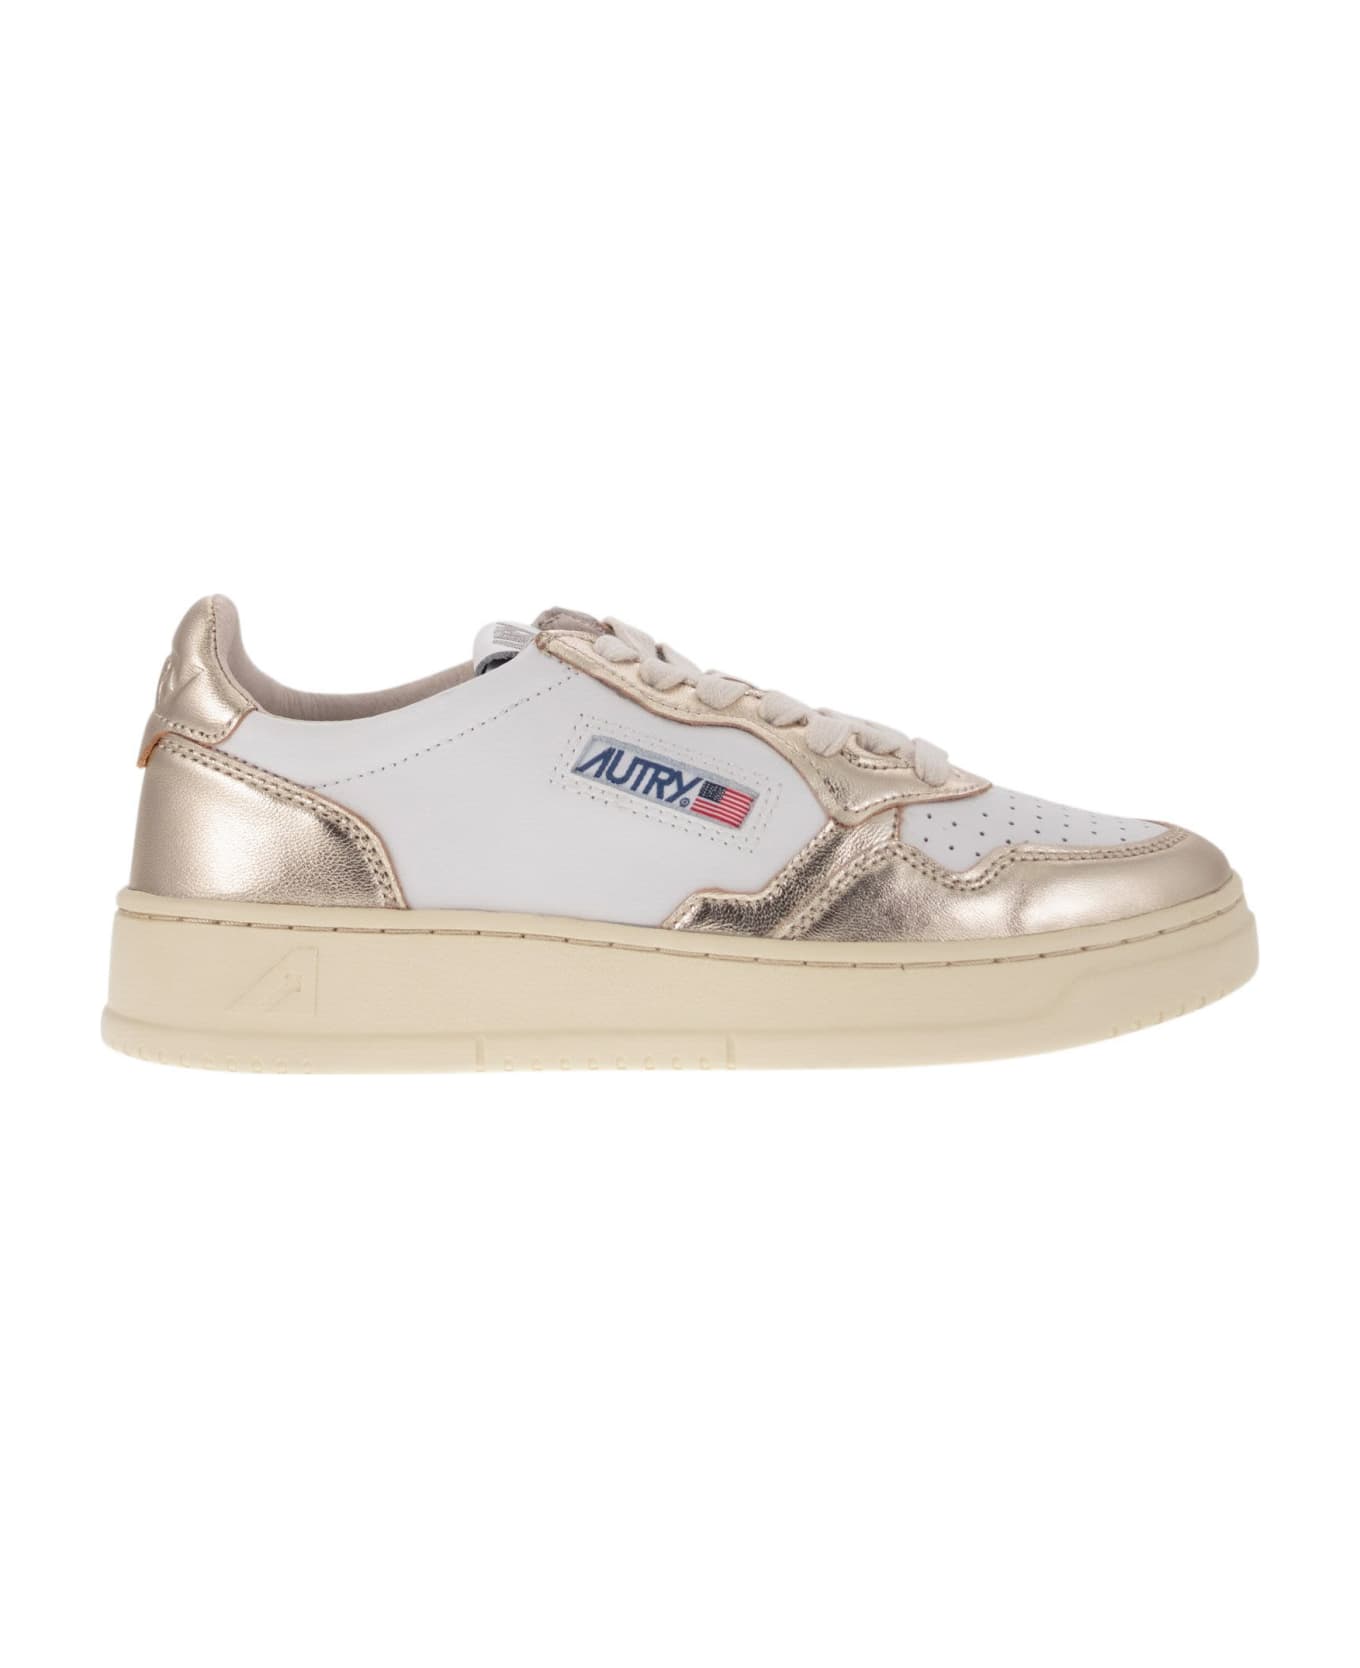 Autry Platinum And White Two-tone Leather Medalist Low Sneakers - Platino